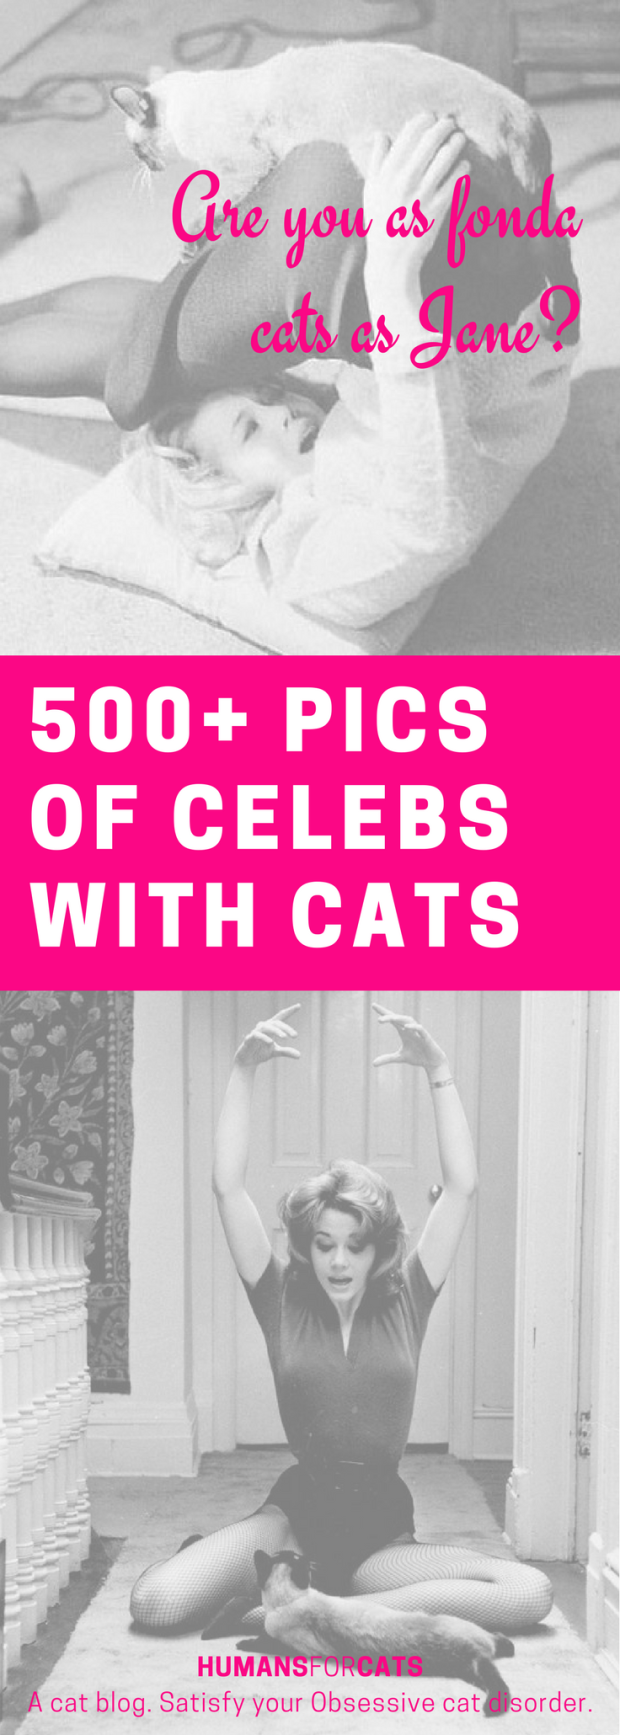 celebswithcats (1)